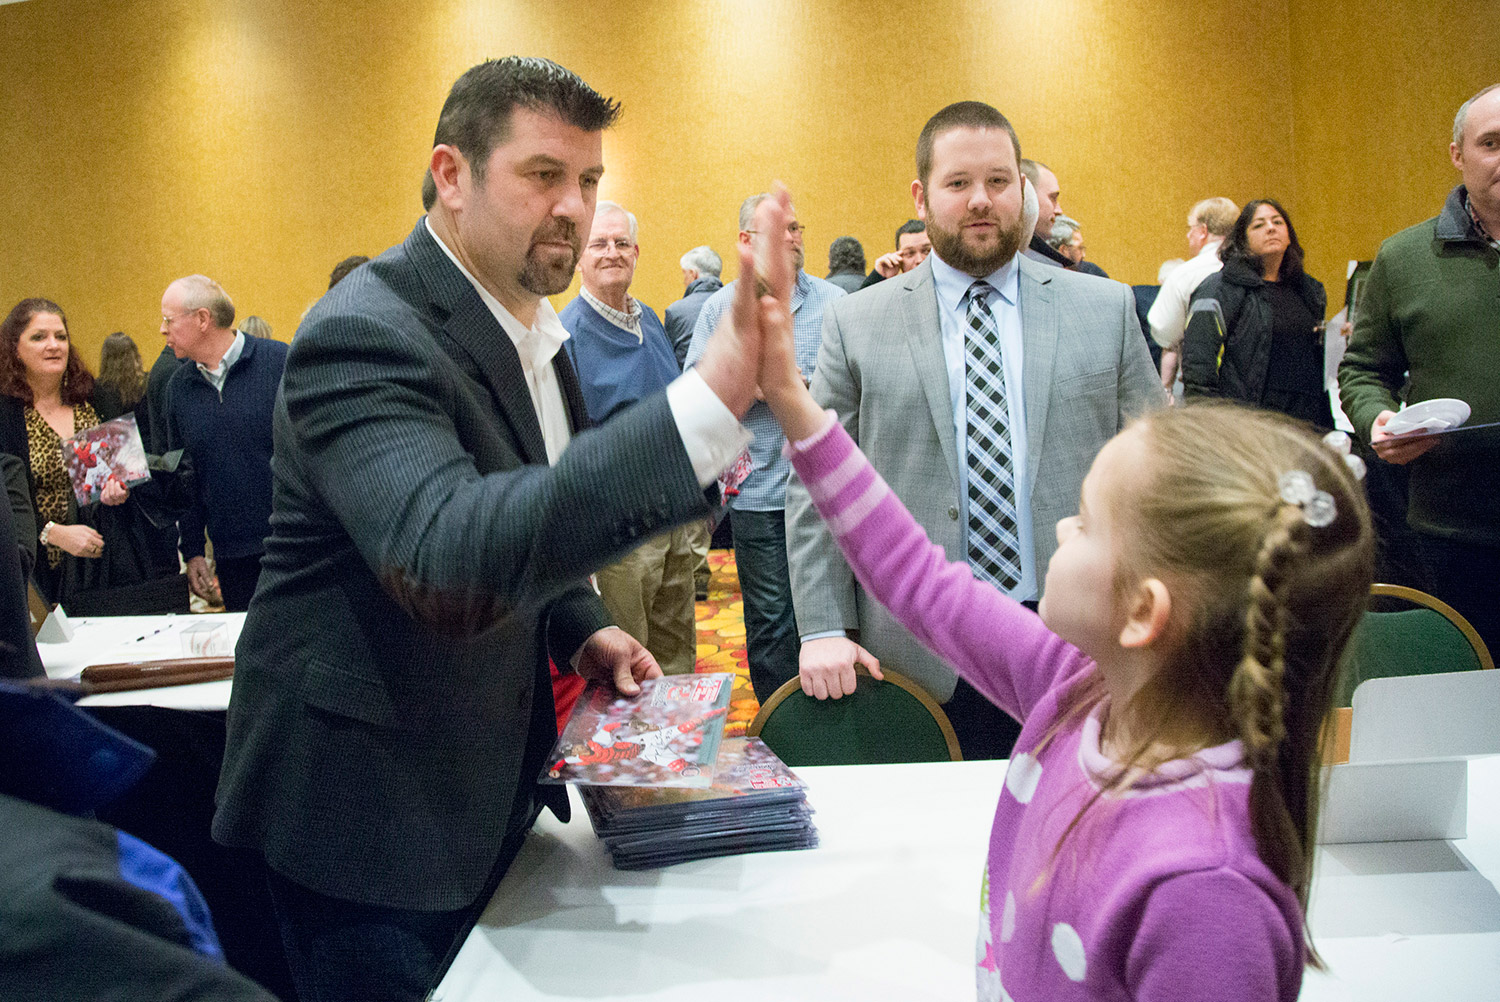 Jason Varitek, the catcher for Boston's 2004 and 2007 World Series championship teams, gives a high-five to Dominique Giroux-Pare, 8, of Winslow during the Portland Sea Dogs' annual Hot Stove Dinner on Friday night.